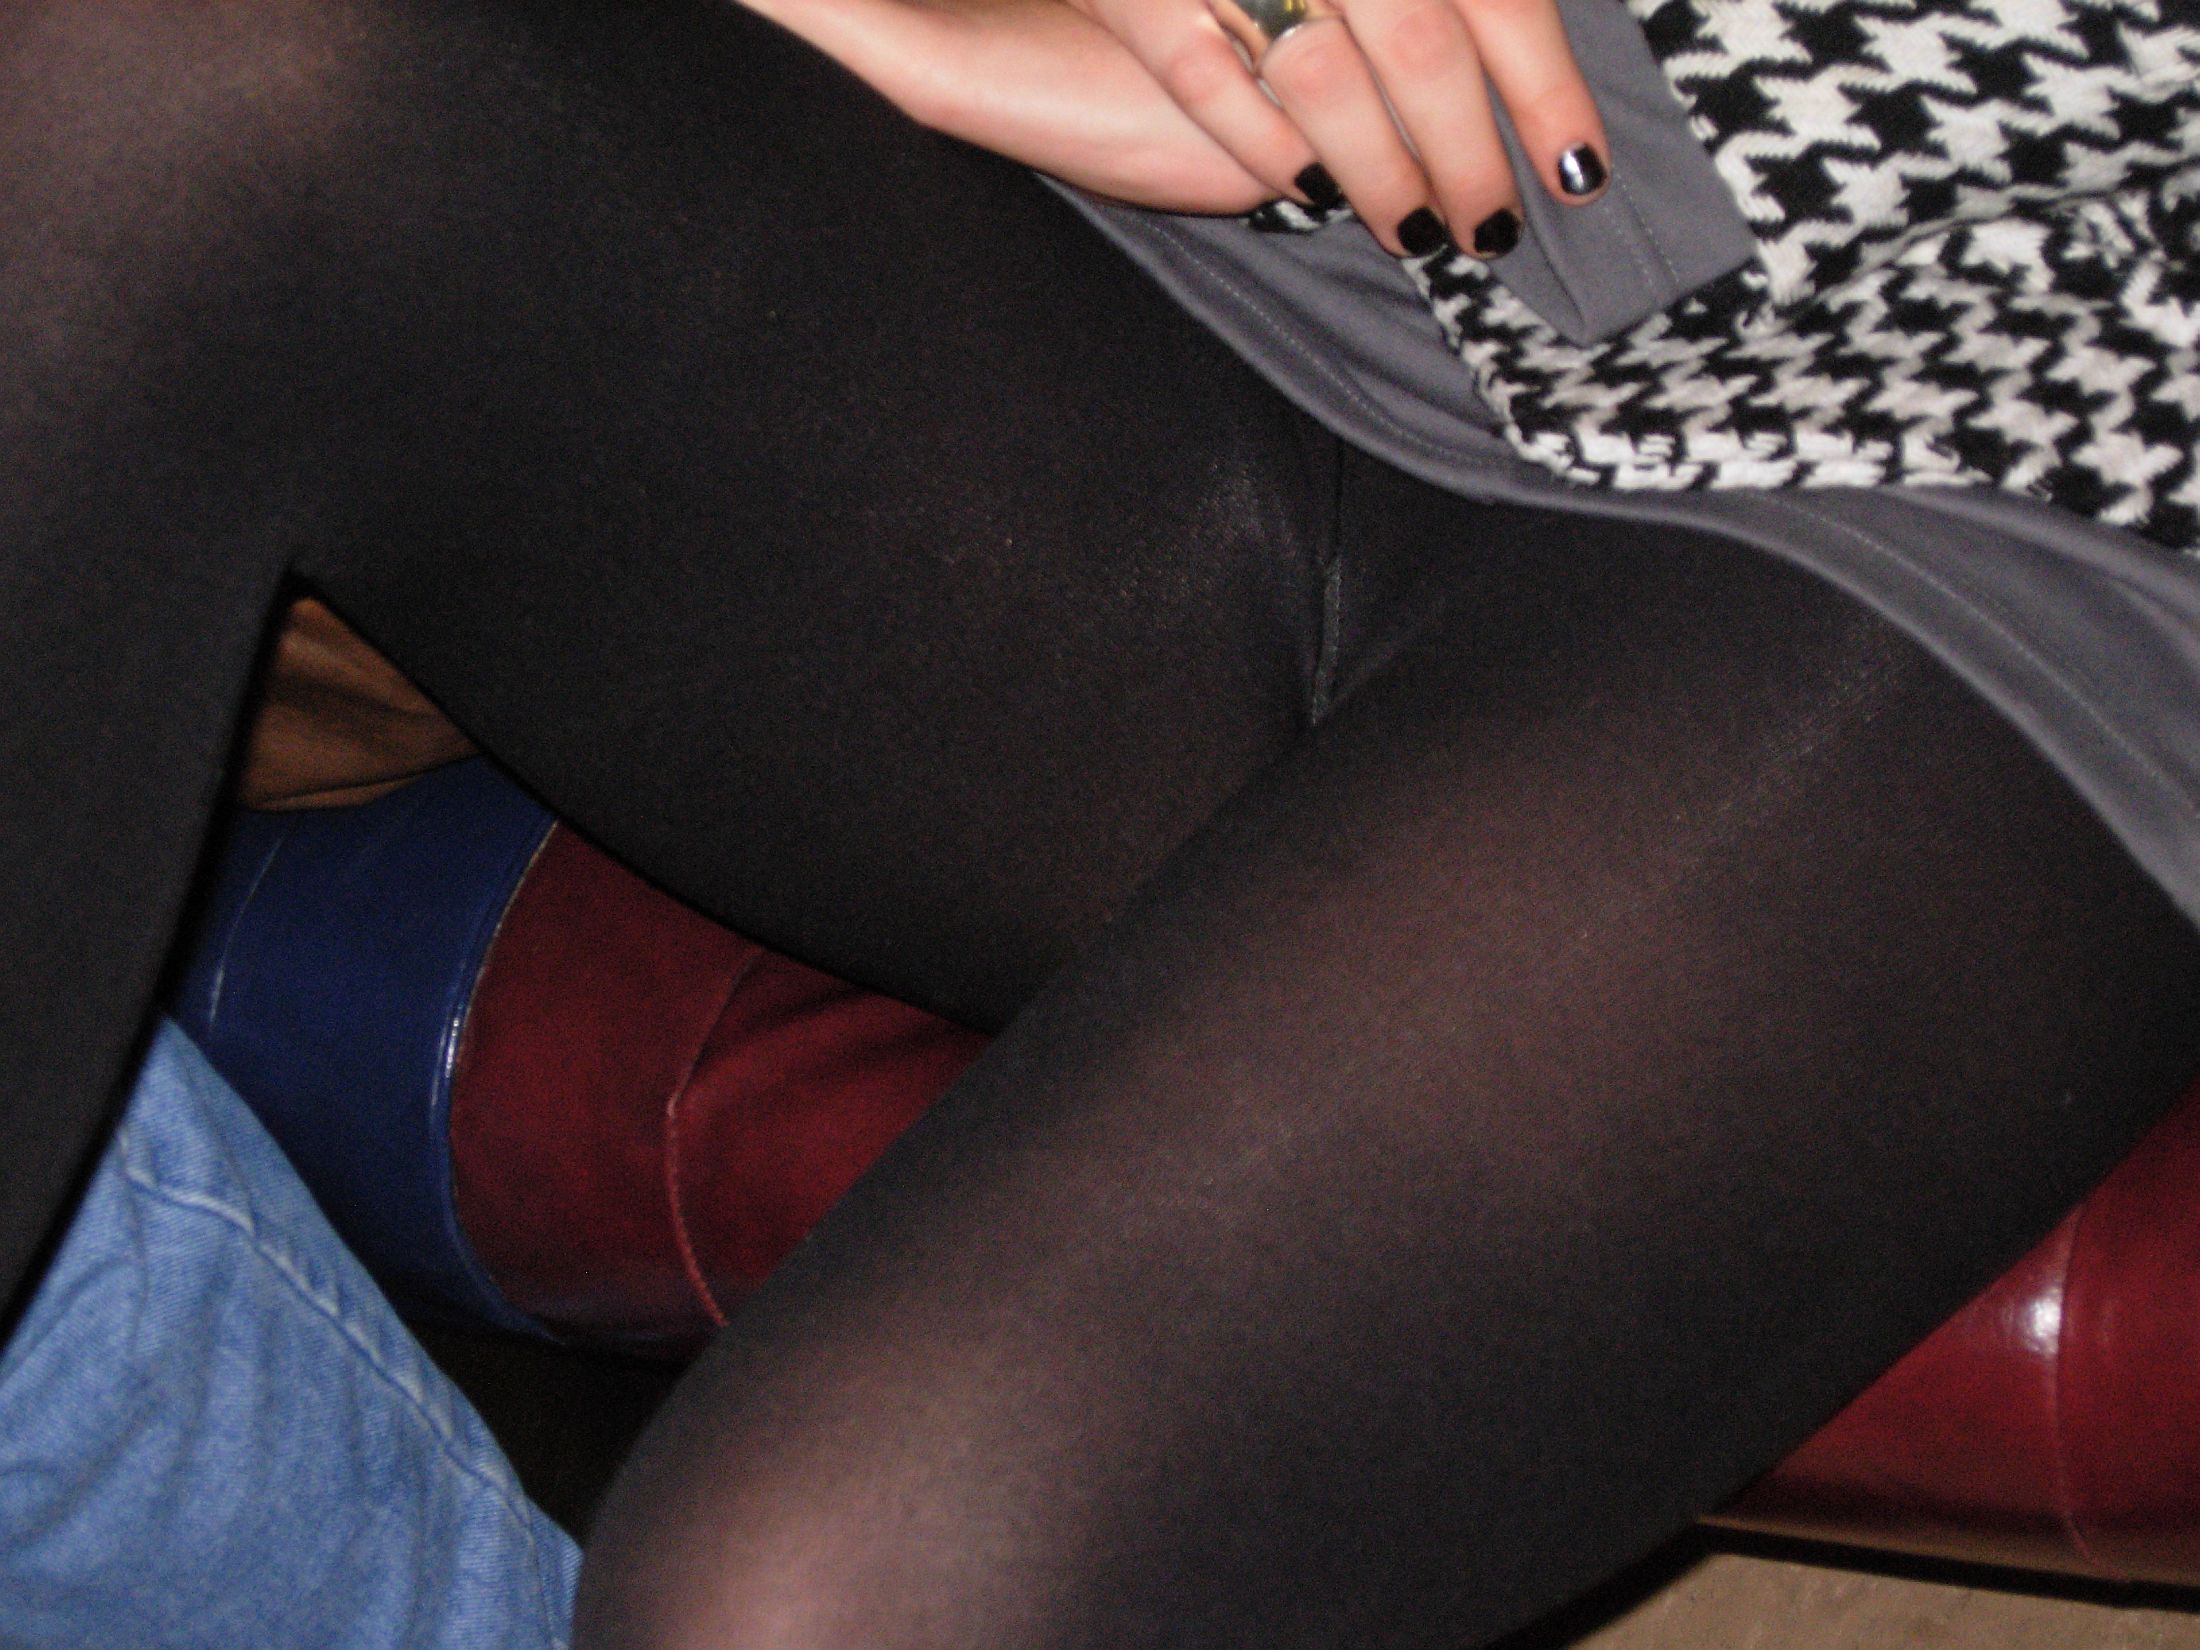 Upskirt pics of passed out chick